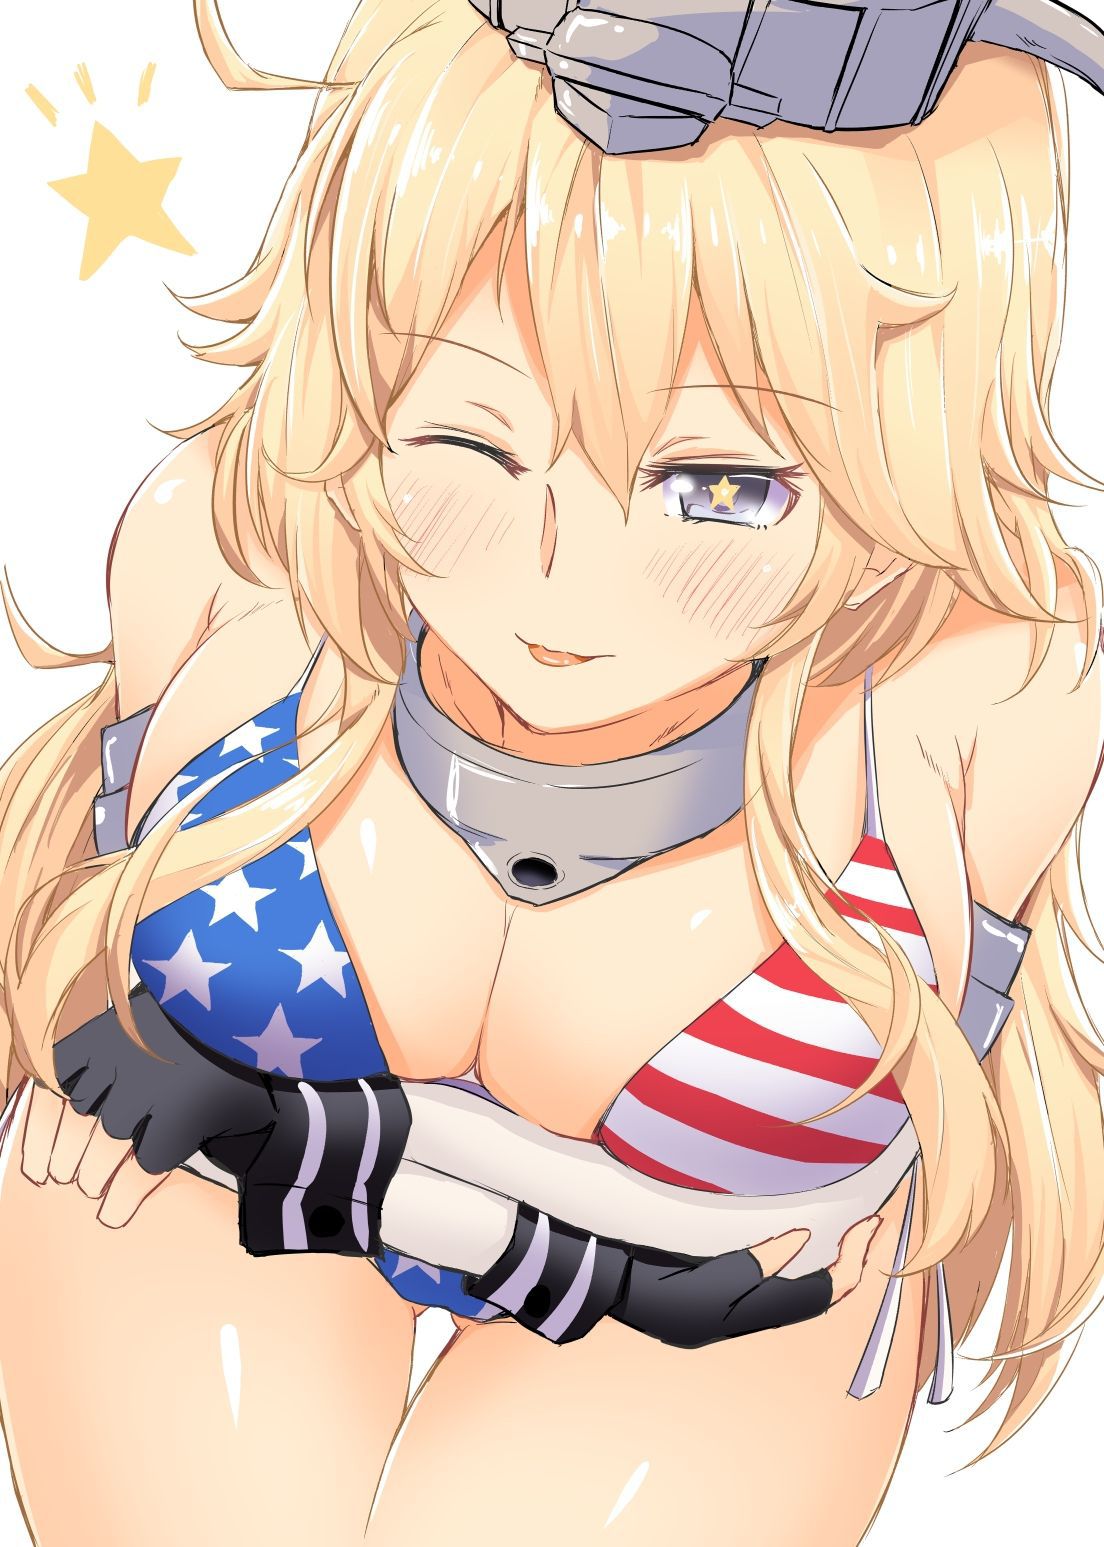 [Second / ZIP] USA! USA! Piow Chanko and ship it together images of Iowa 19